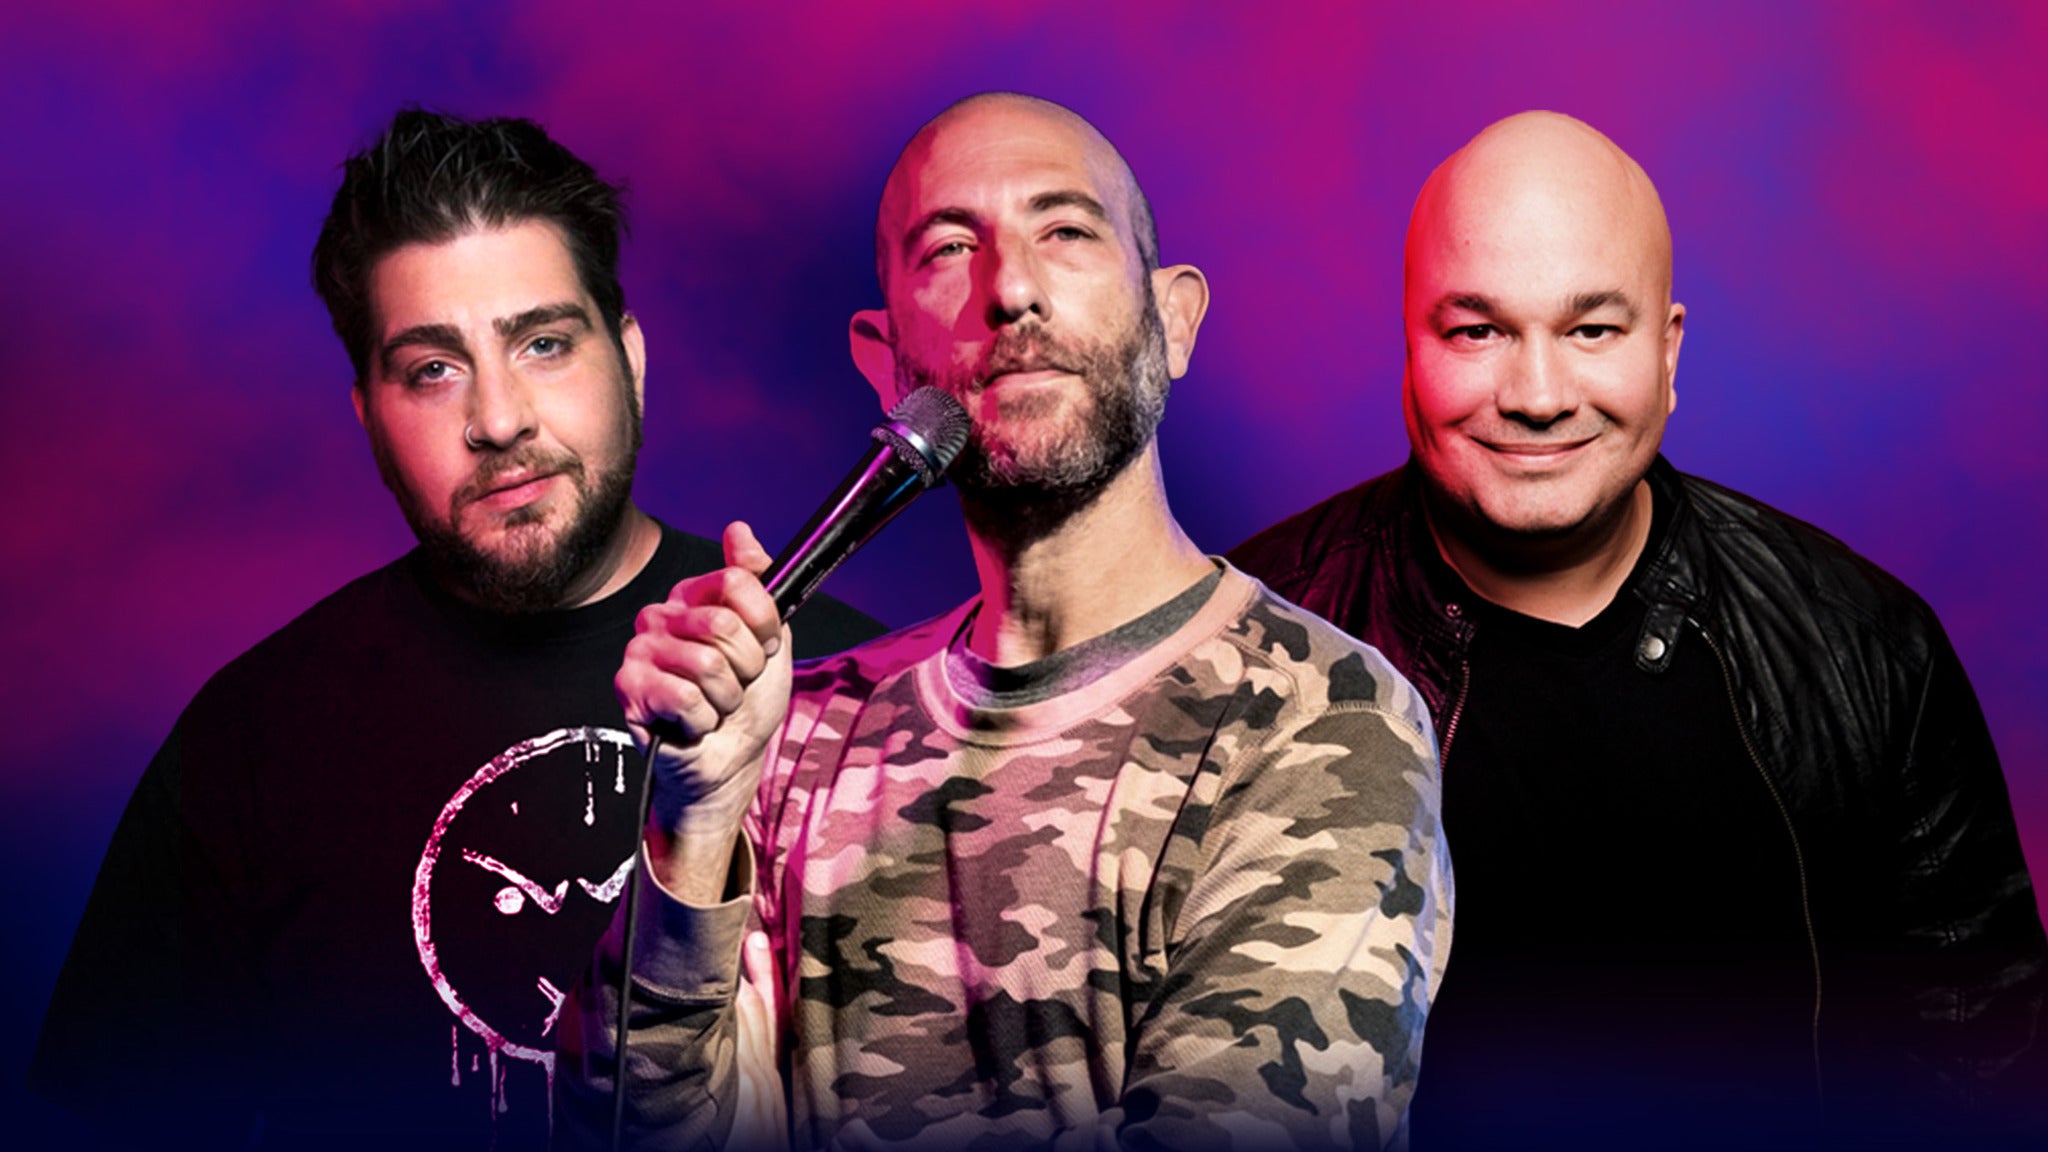 Ari Shaffir, Big Jay Oakerson, and Robert Kelly presale password for early tickets in Grand Rapids